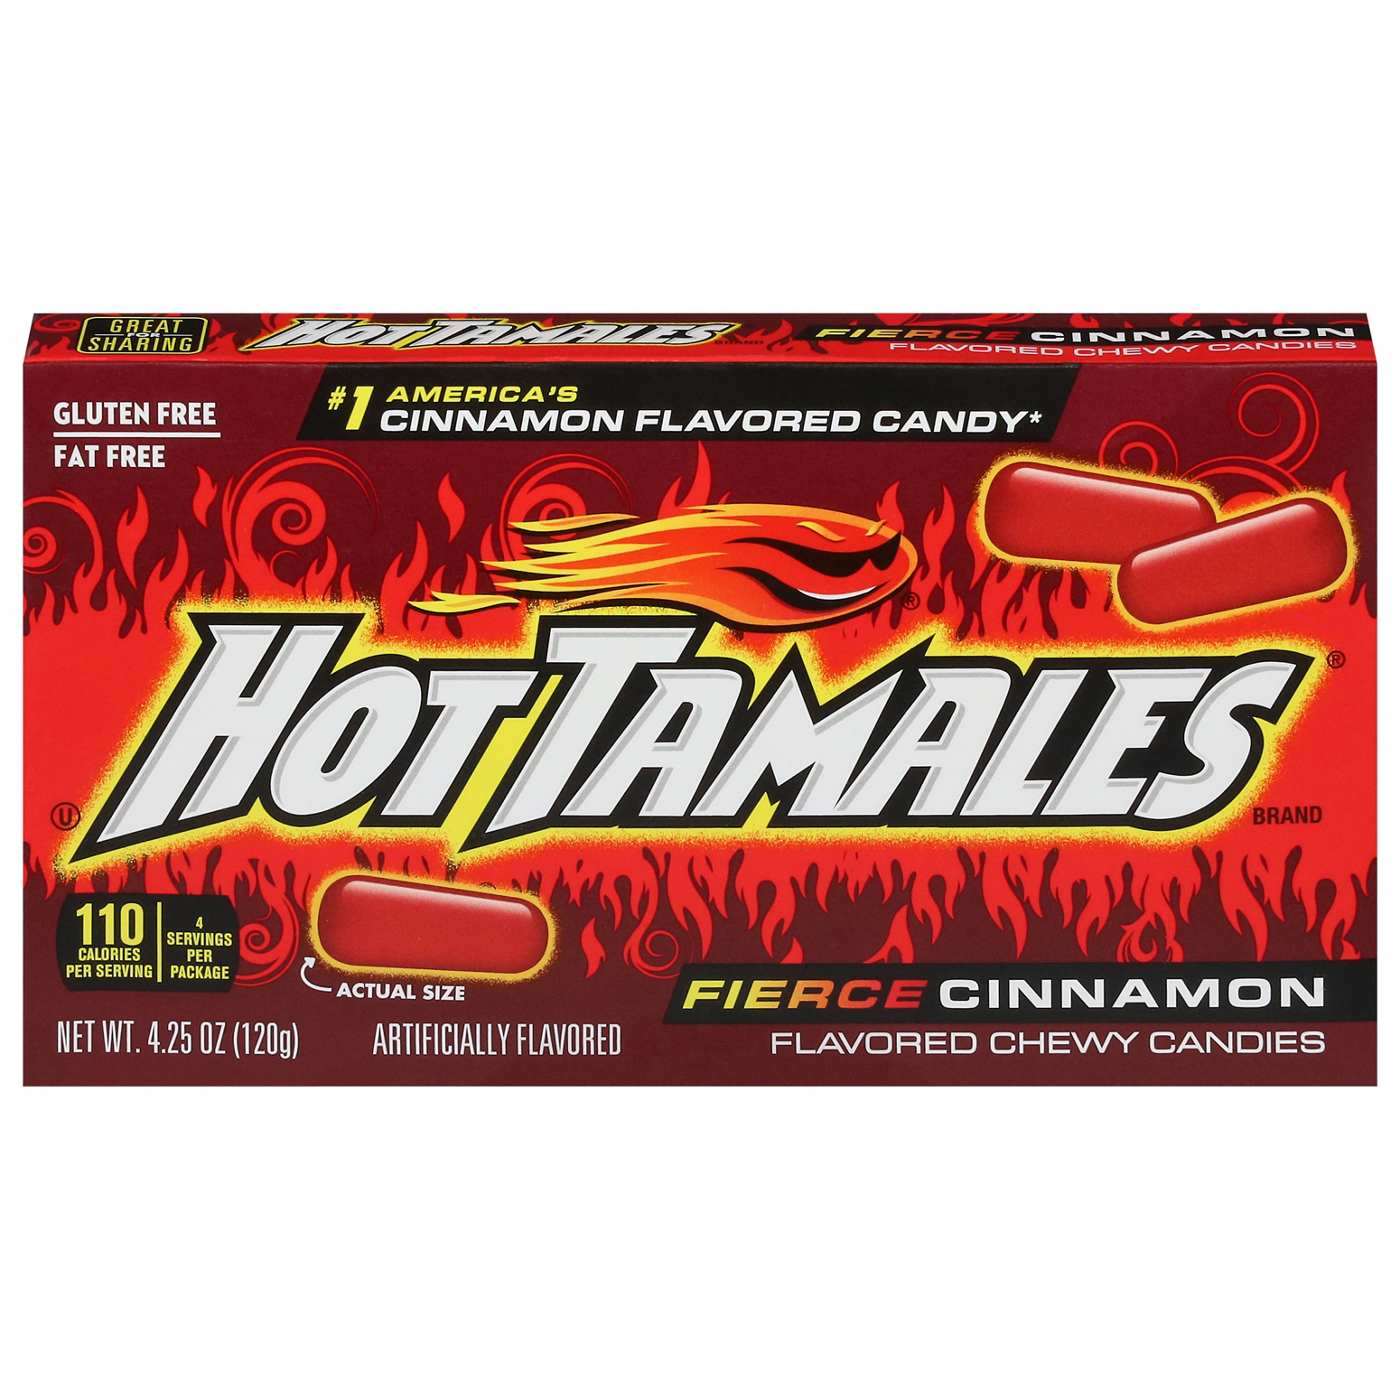 Hot Tamales Fierce Cinnamon Chewy Candy Theater Box; image 1 of 2